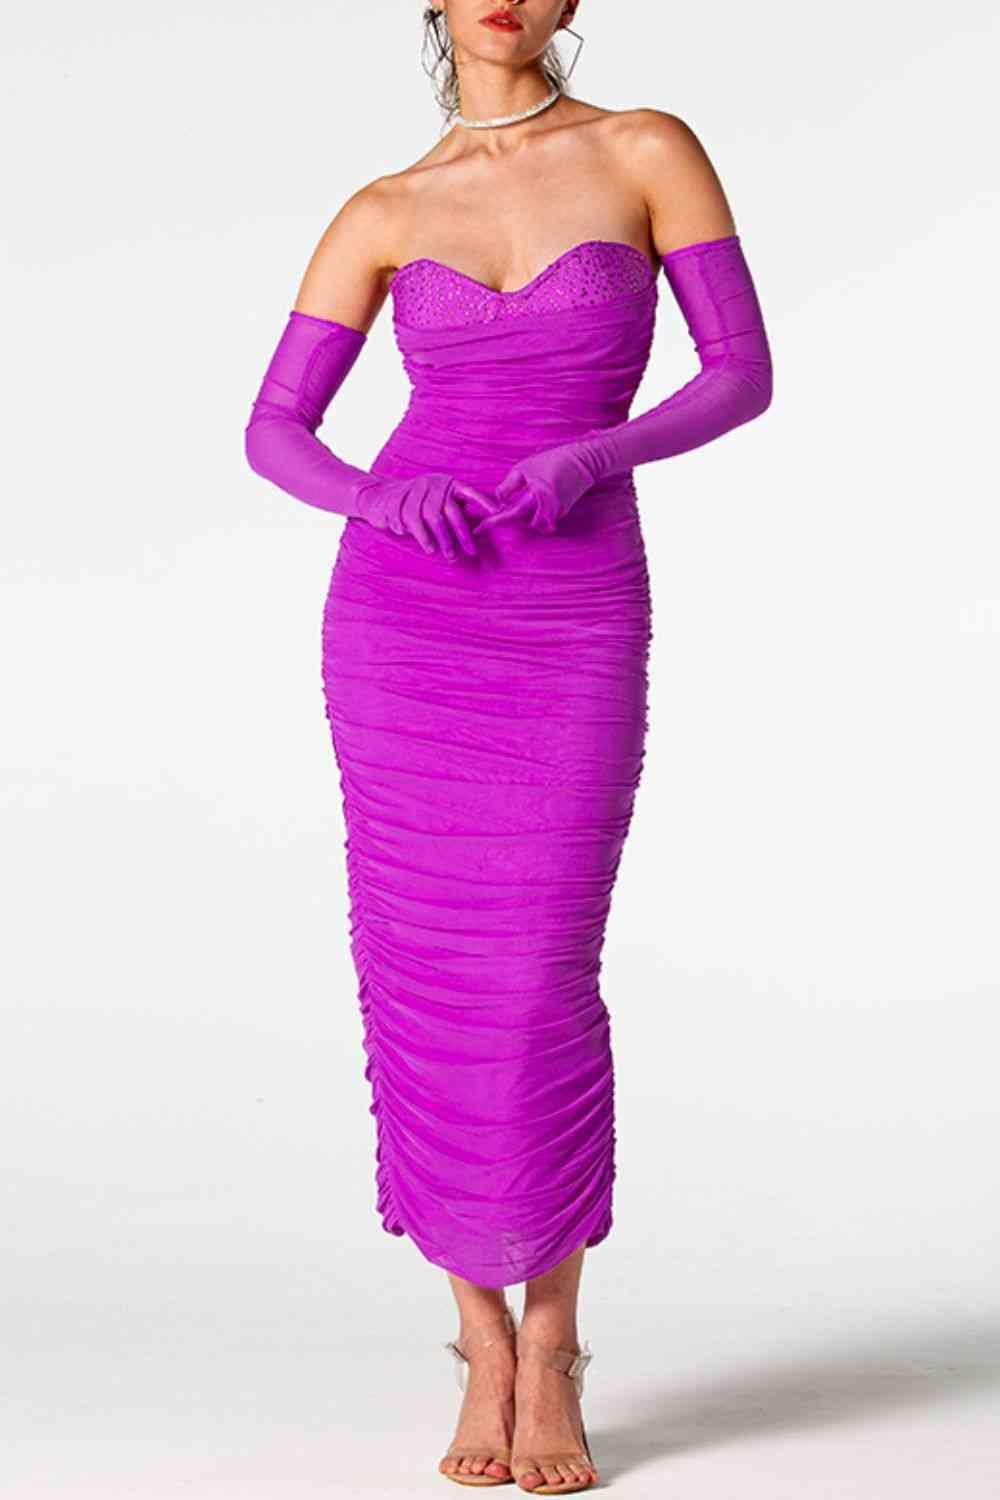 a woman wearing a purple dress and gloves